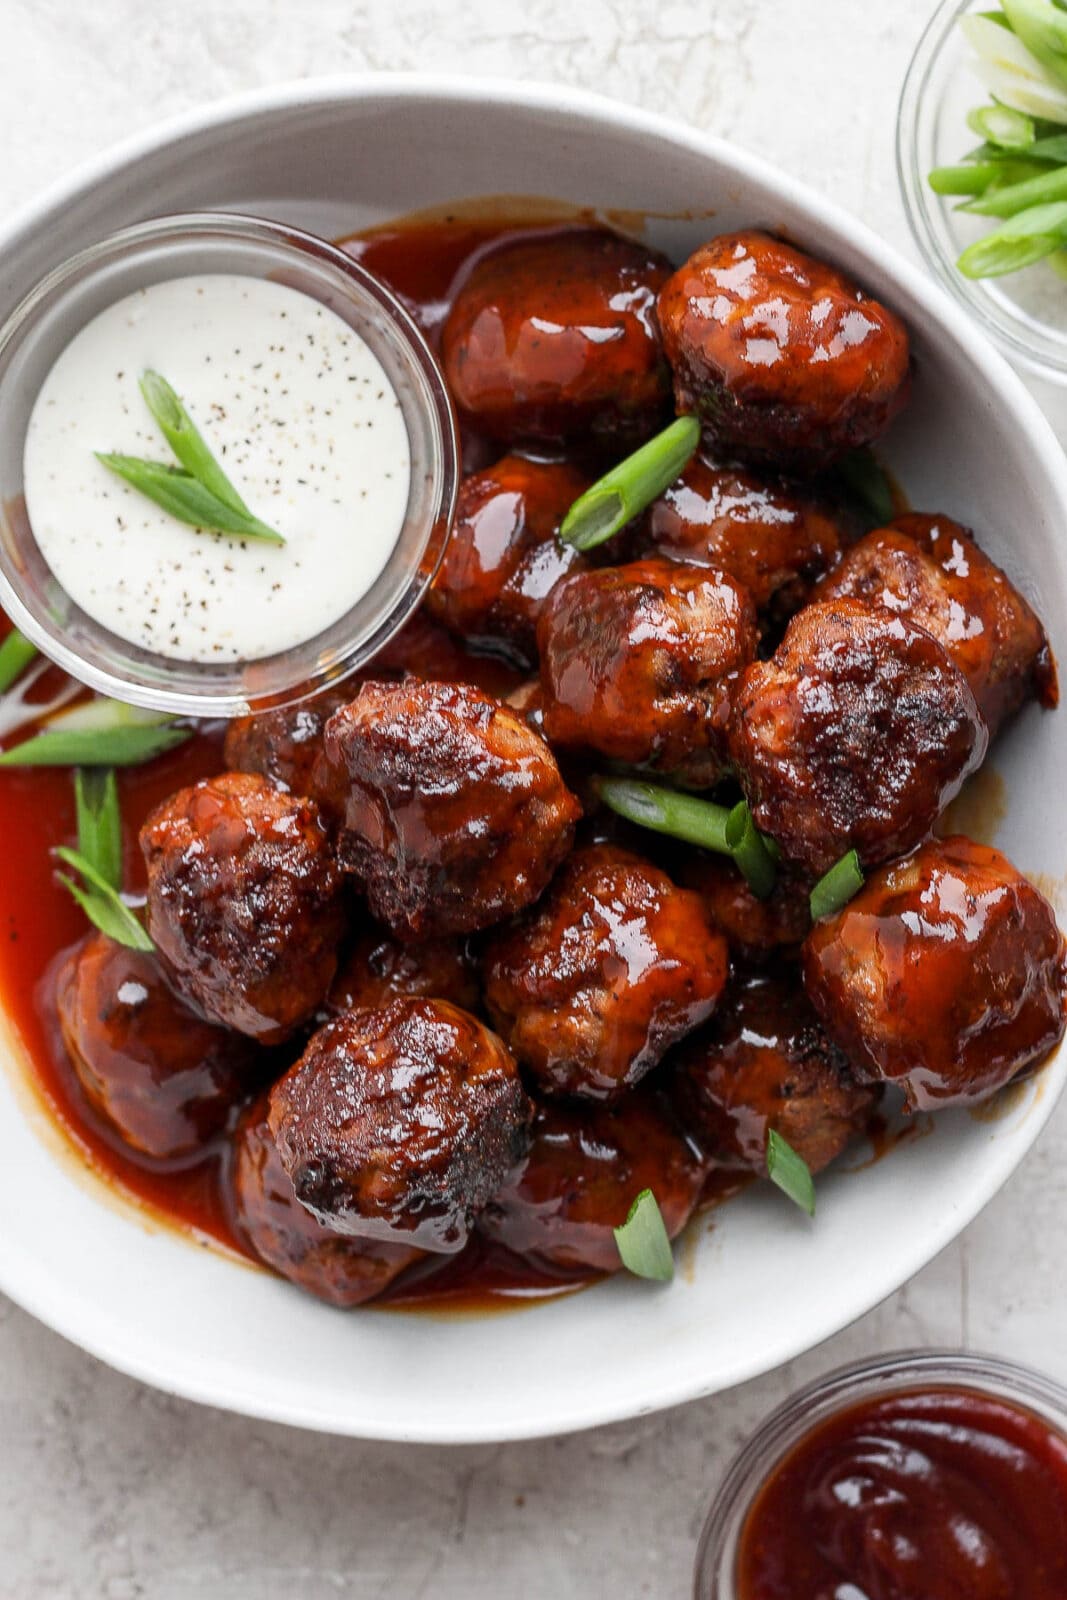 Bowl of BBQ meatballs, sliced green onions, and dipping sauce.